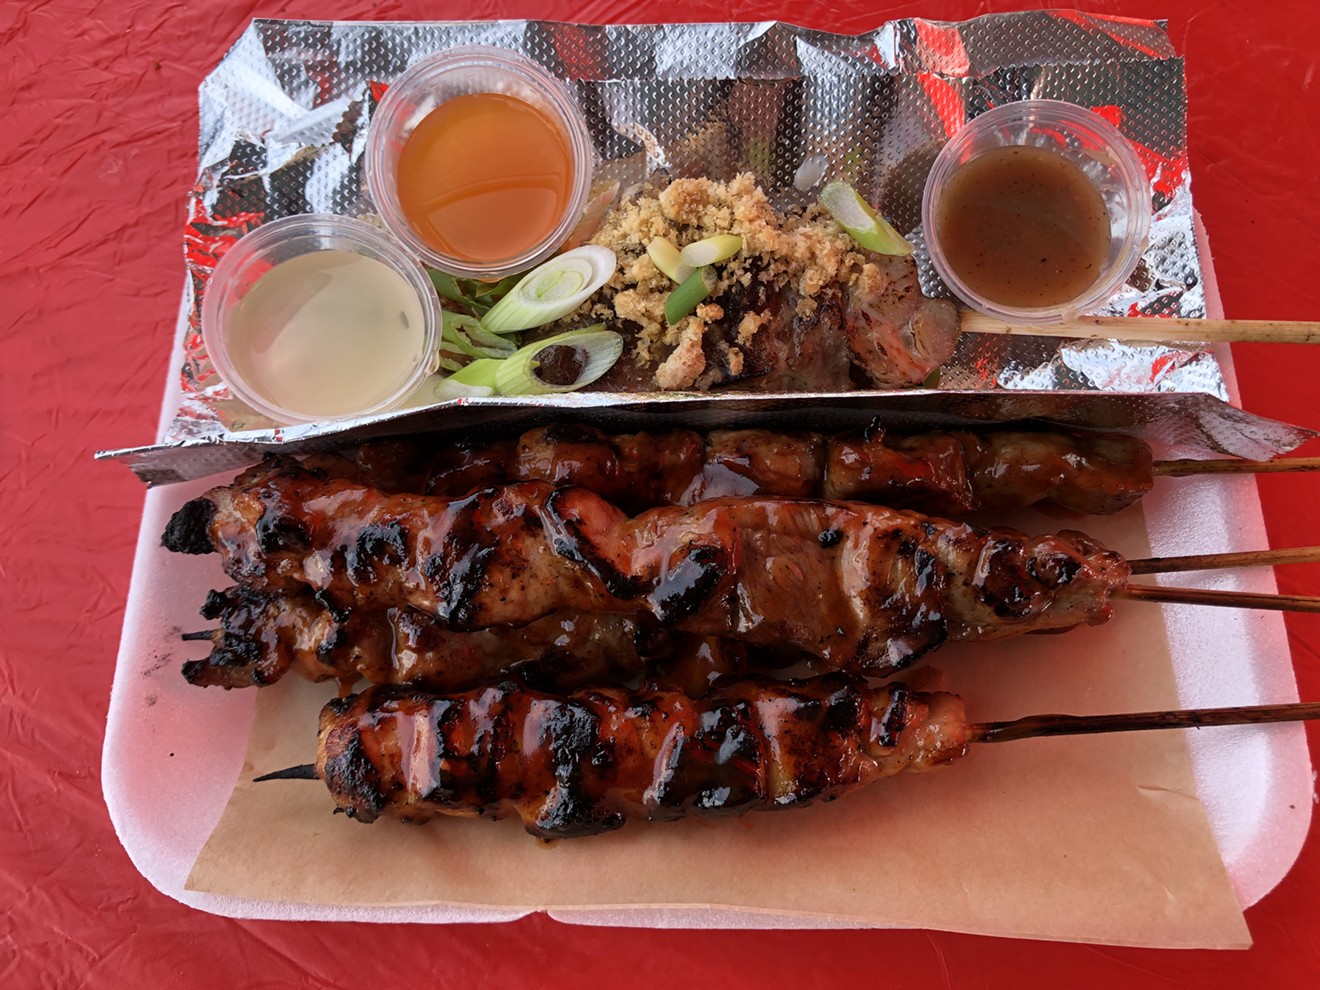 Skewers and a lechon baboy remix born on a charcoal grill.